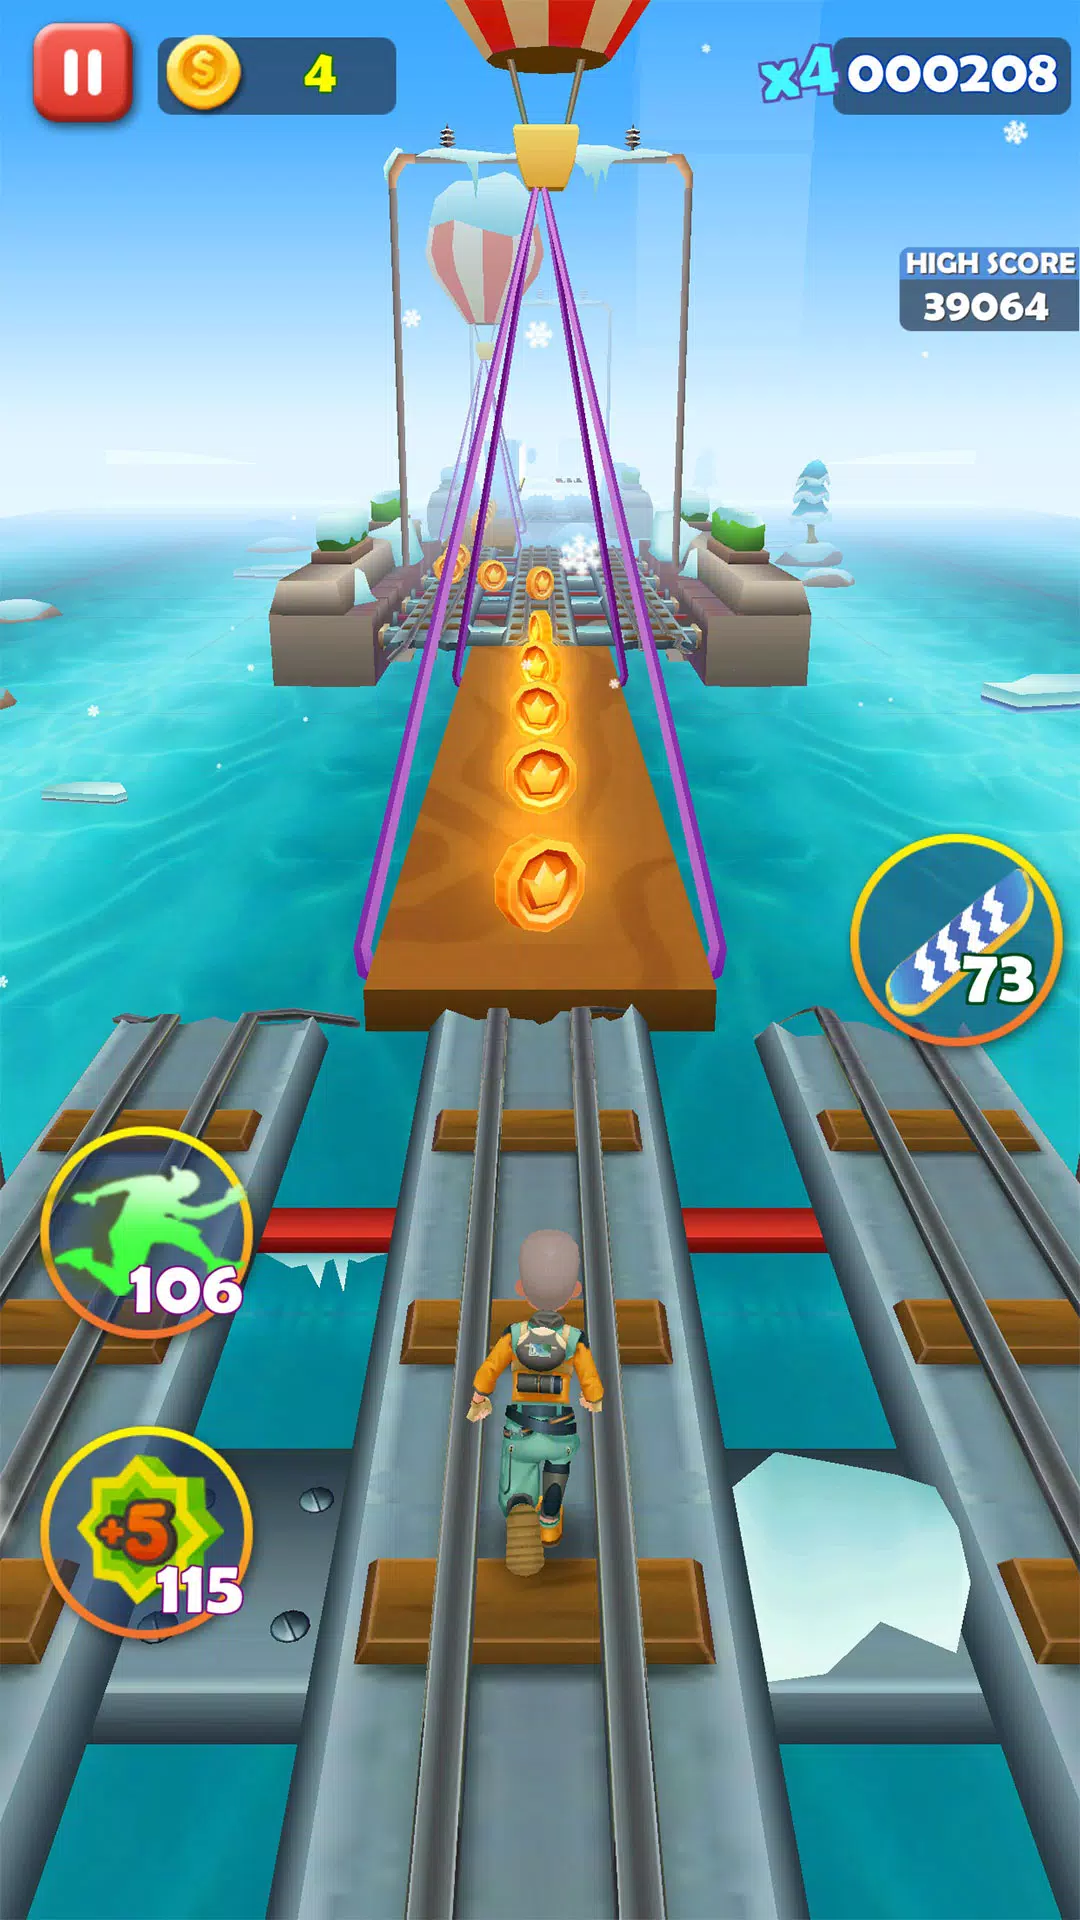 City Runner - Fun Running Game for Android - Free App Download